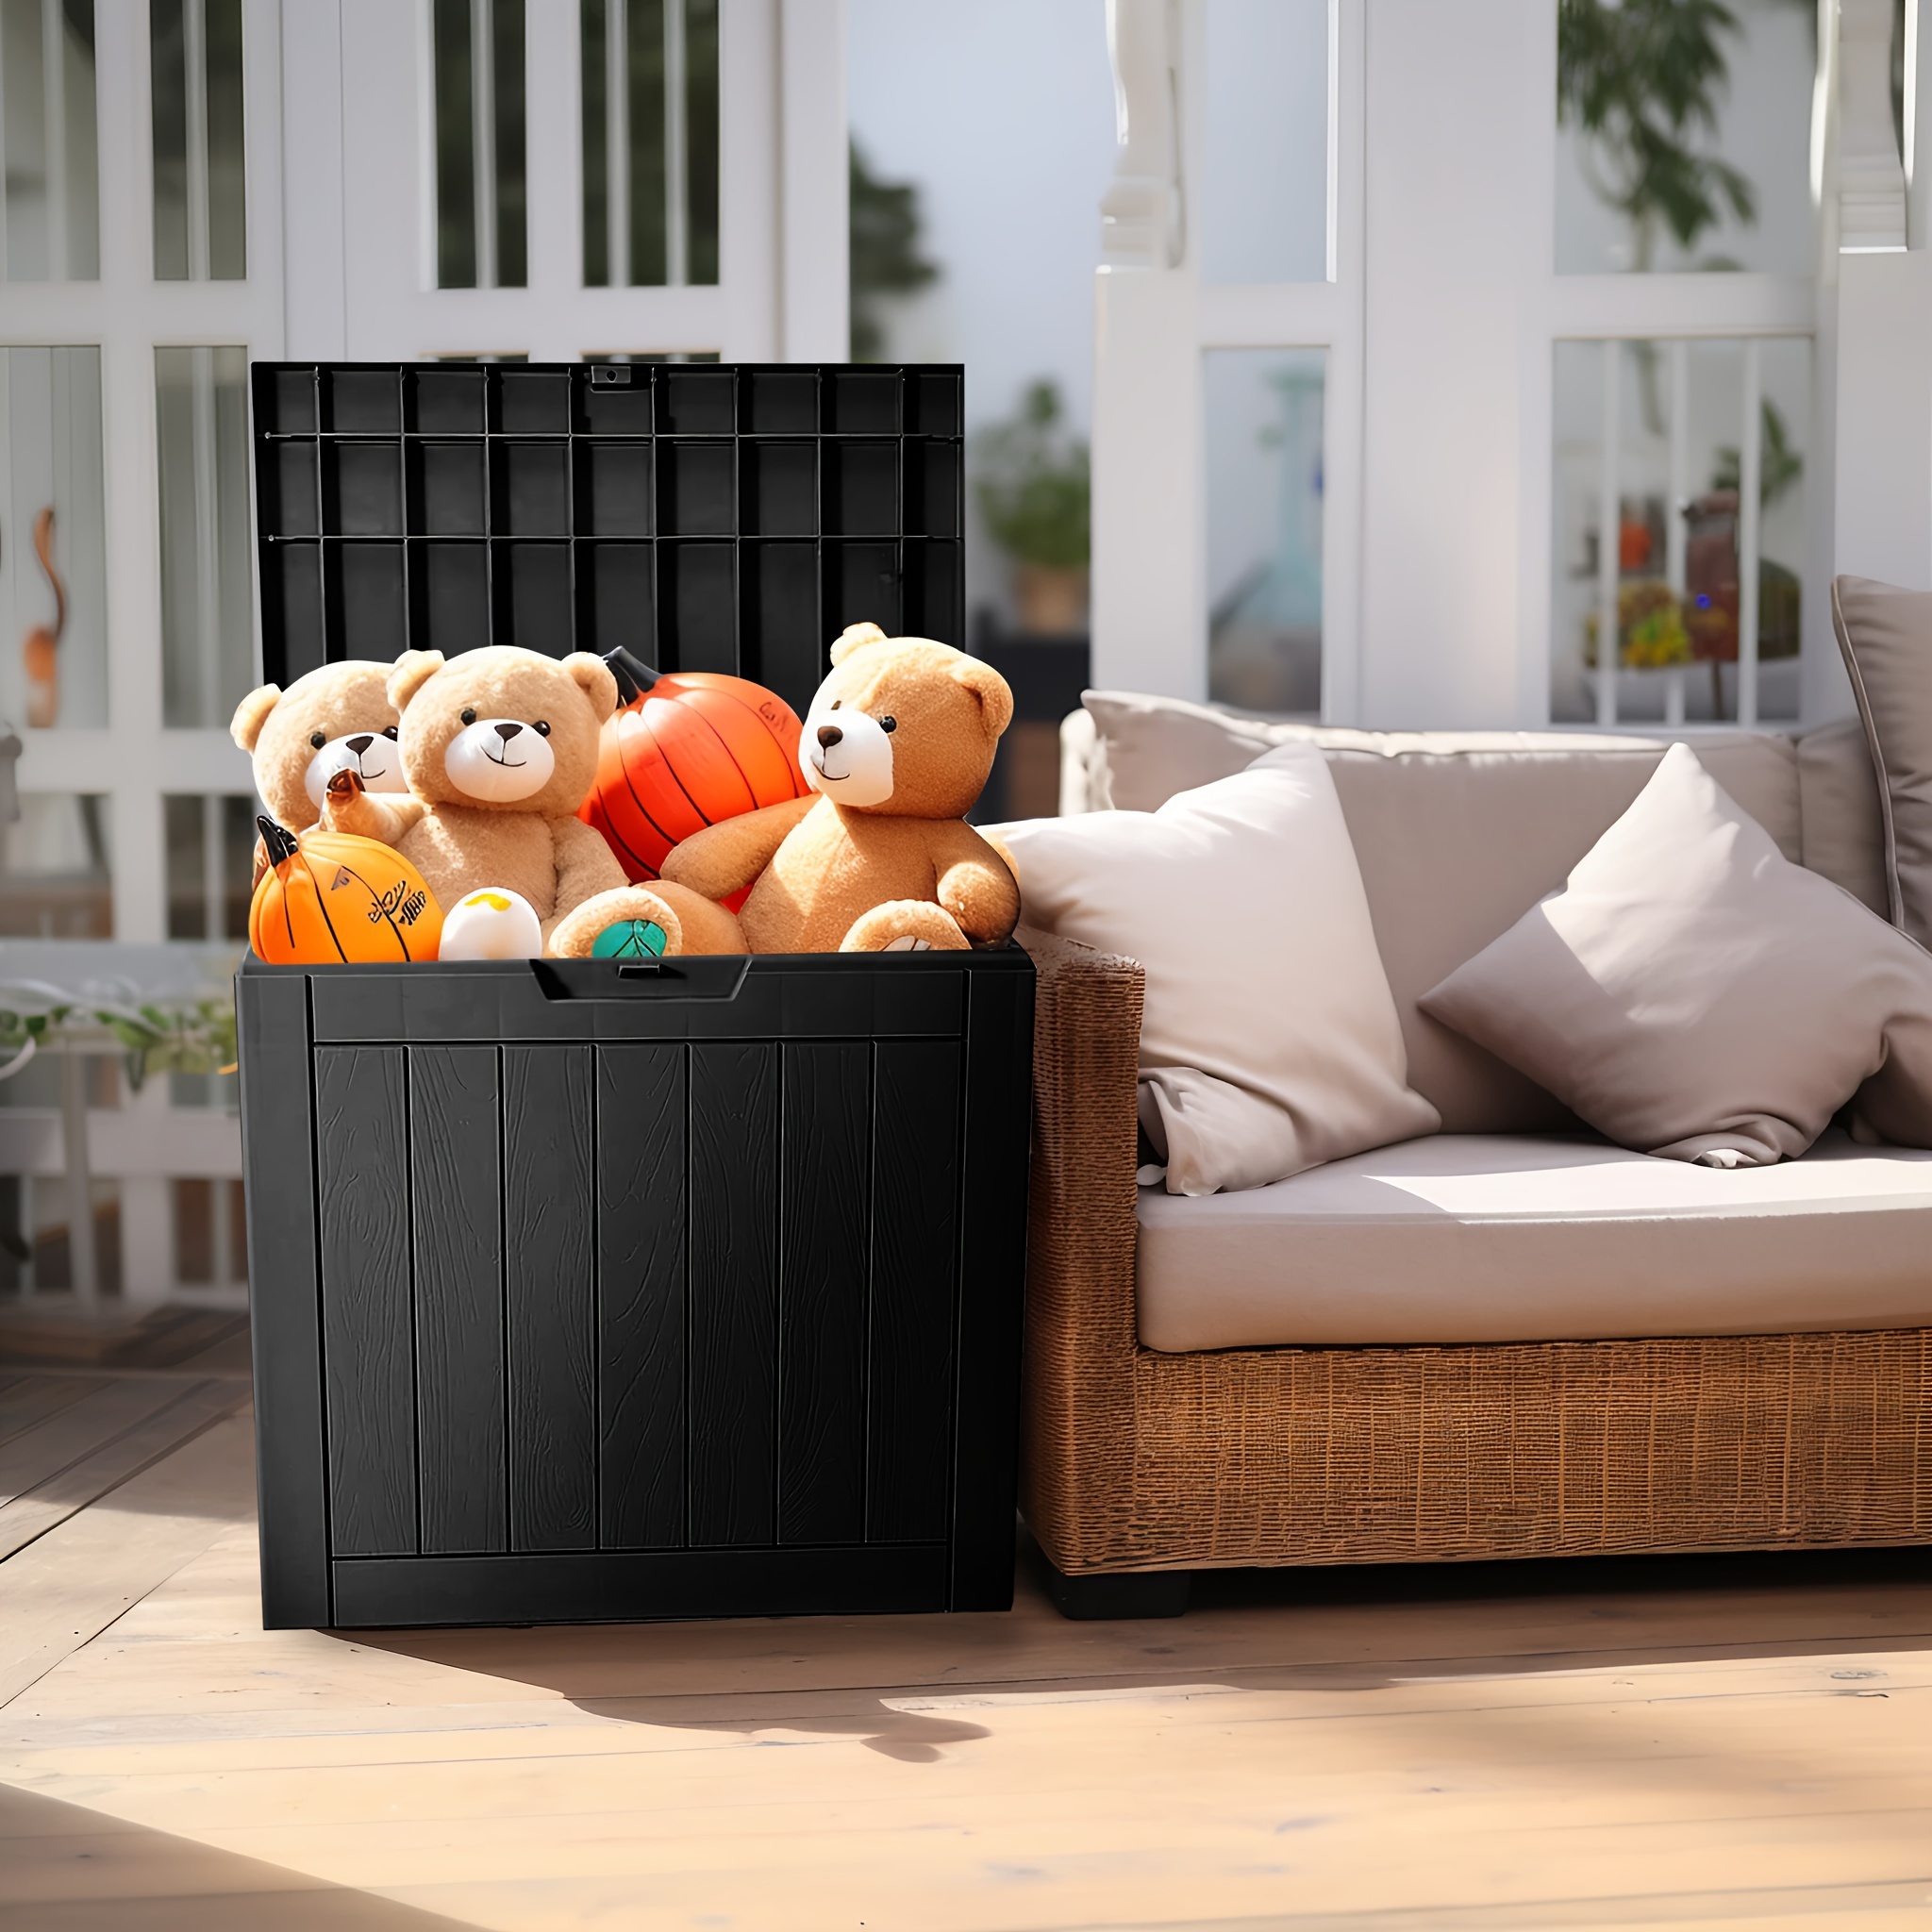 

30 Gallon Outdoor Storage Box Deck Box | Weather-resistant Patio Storage Cabinet For Kitchen, Pool Toys, Gardening Tools And More - Black